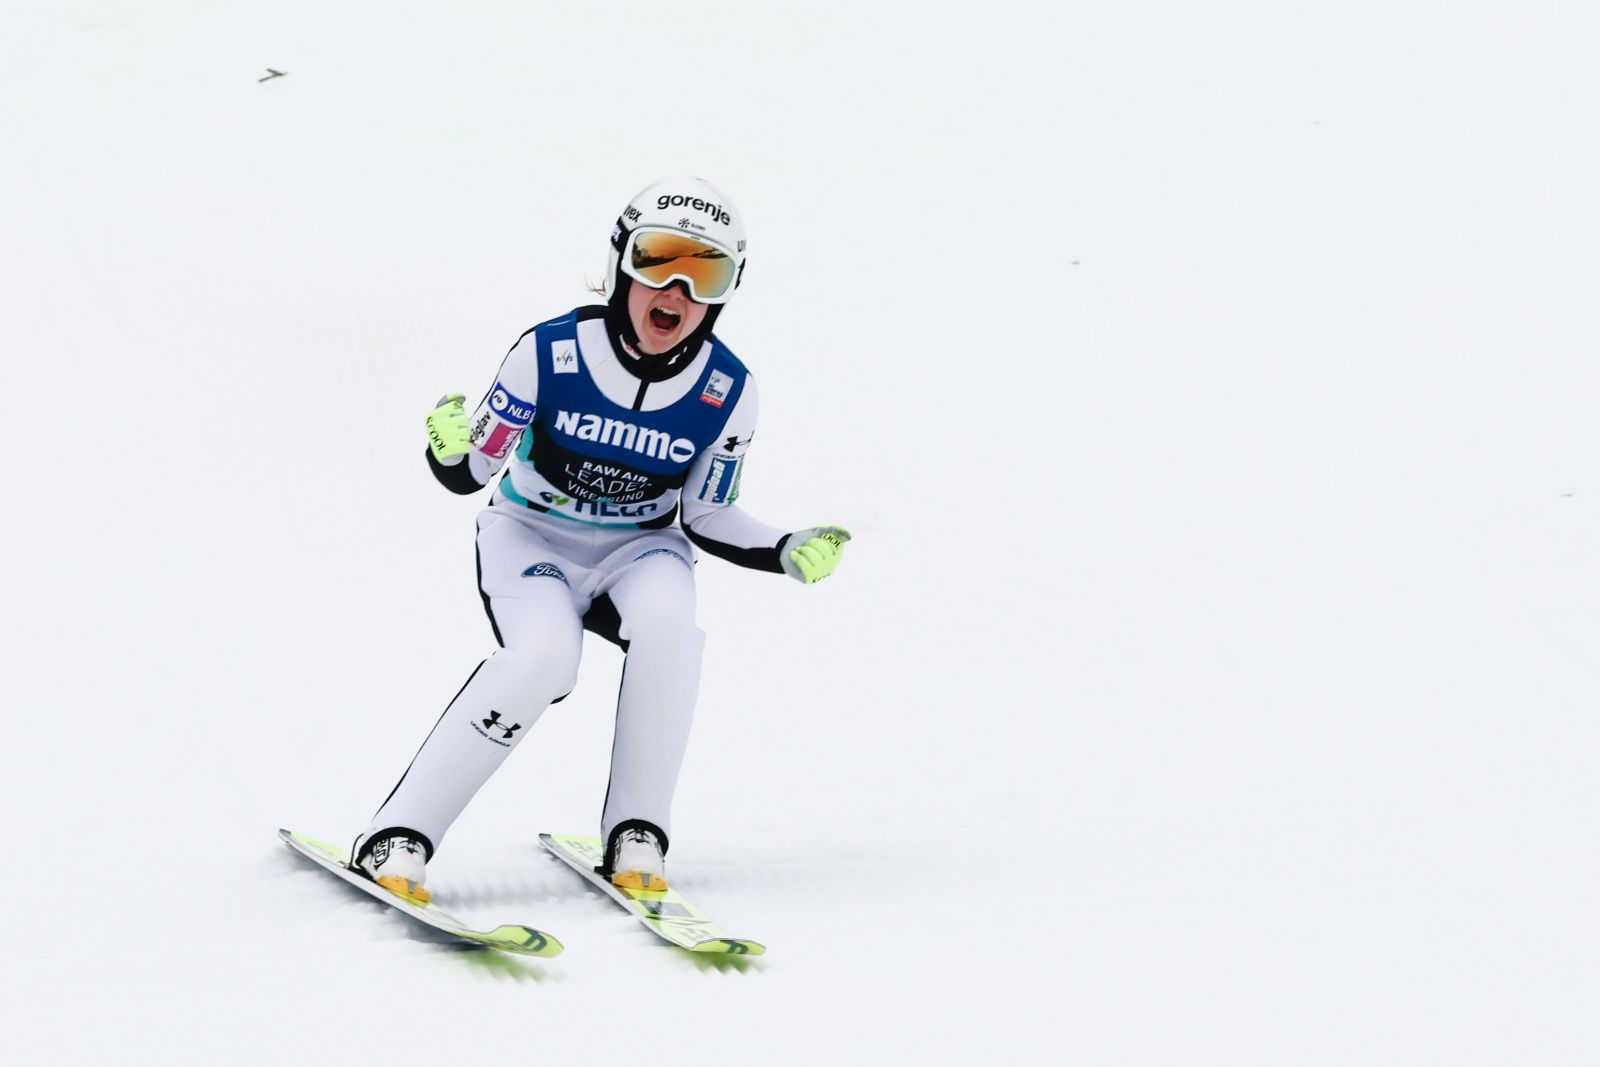 epa10531450 Erna Klinec of Slovenia reacts during the Women's HS240 competition at the FIS Ski Jumping World Cup in Vikersund, Norway, 19 March 2023.  EPA/Geir Olsen  NORWAY OUT